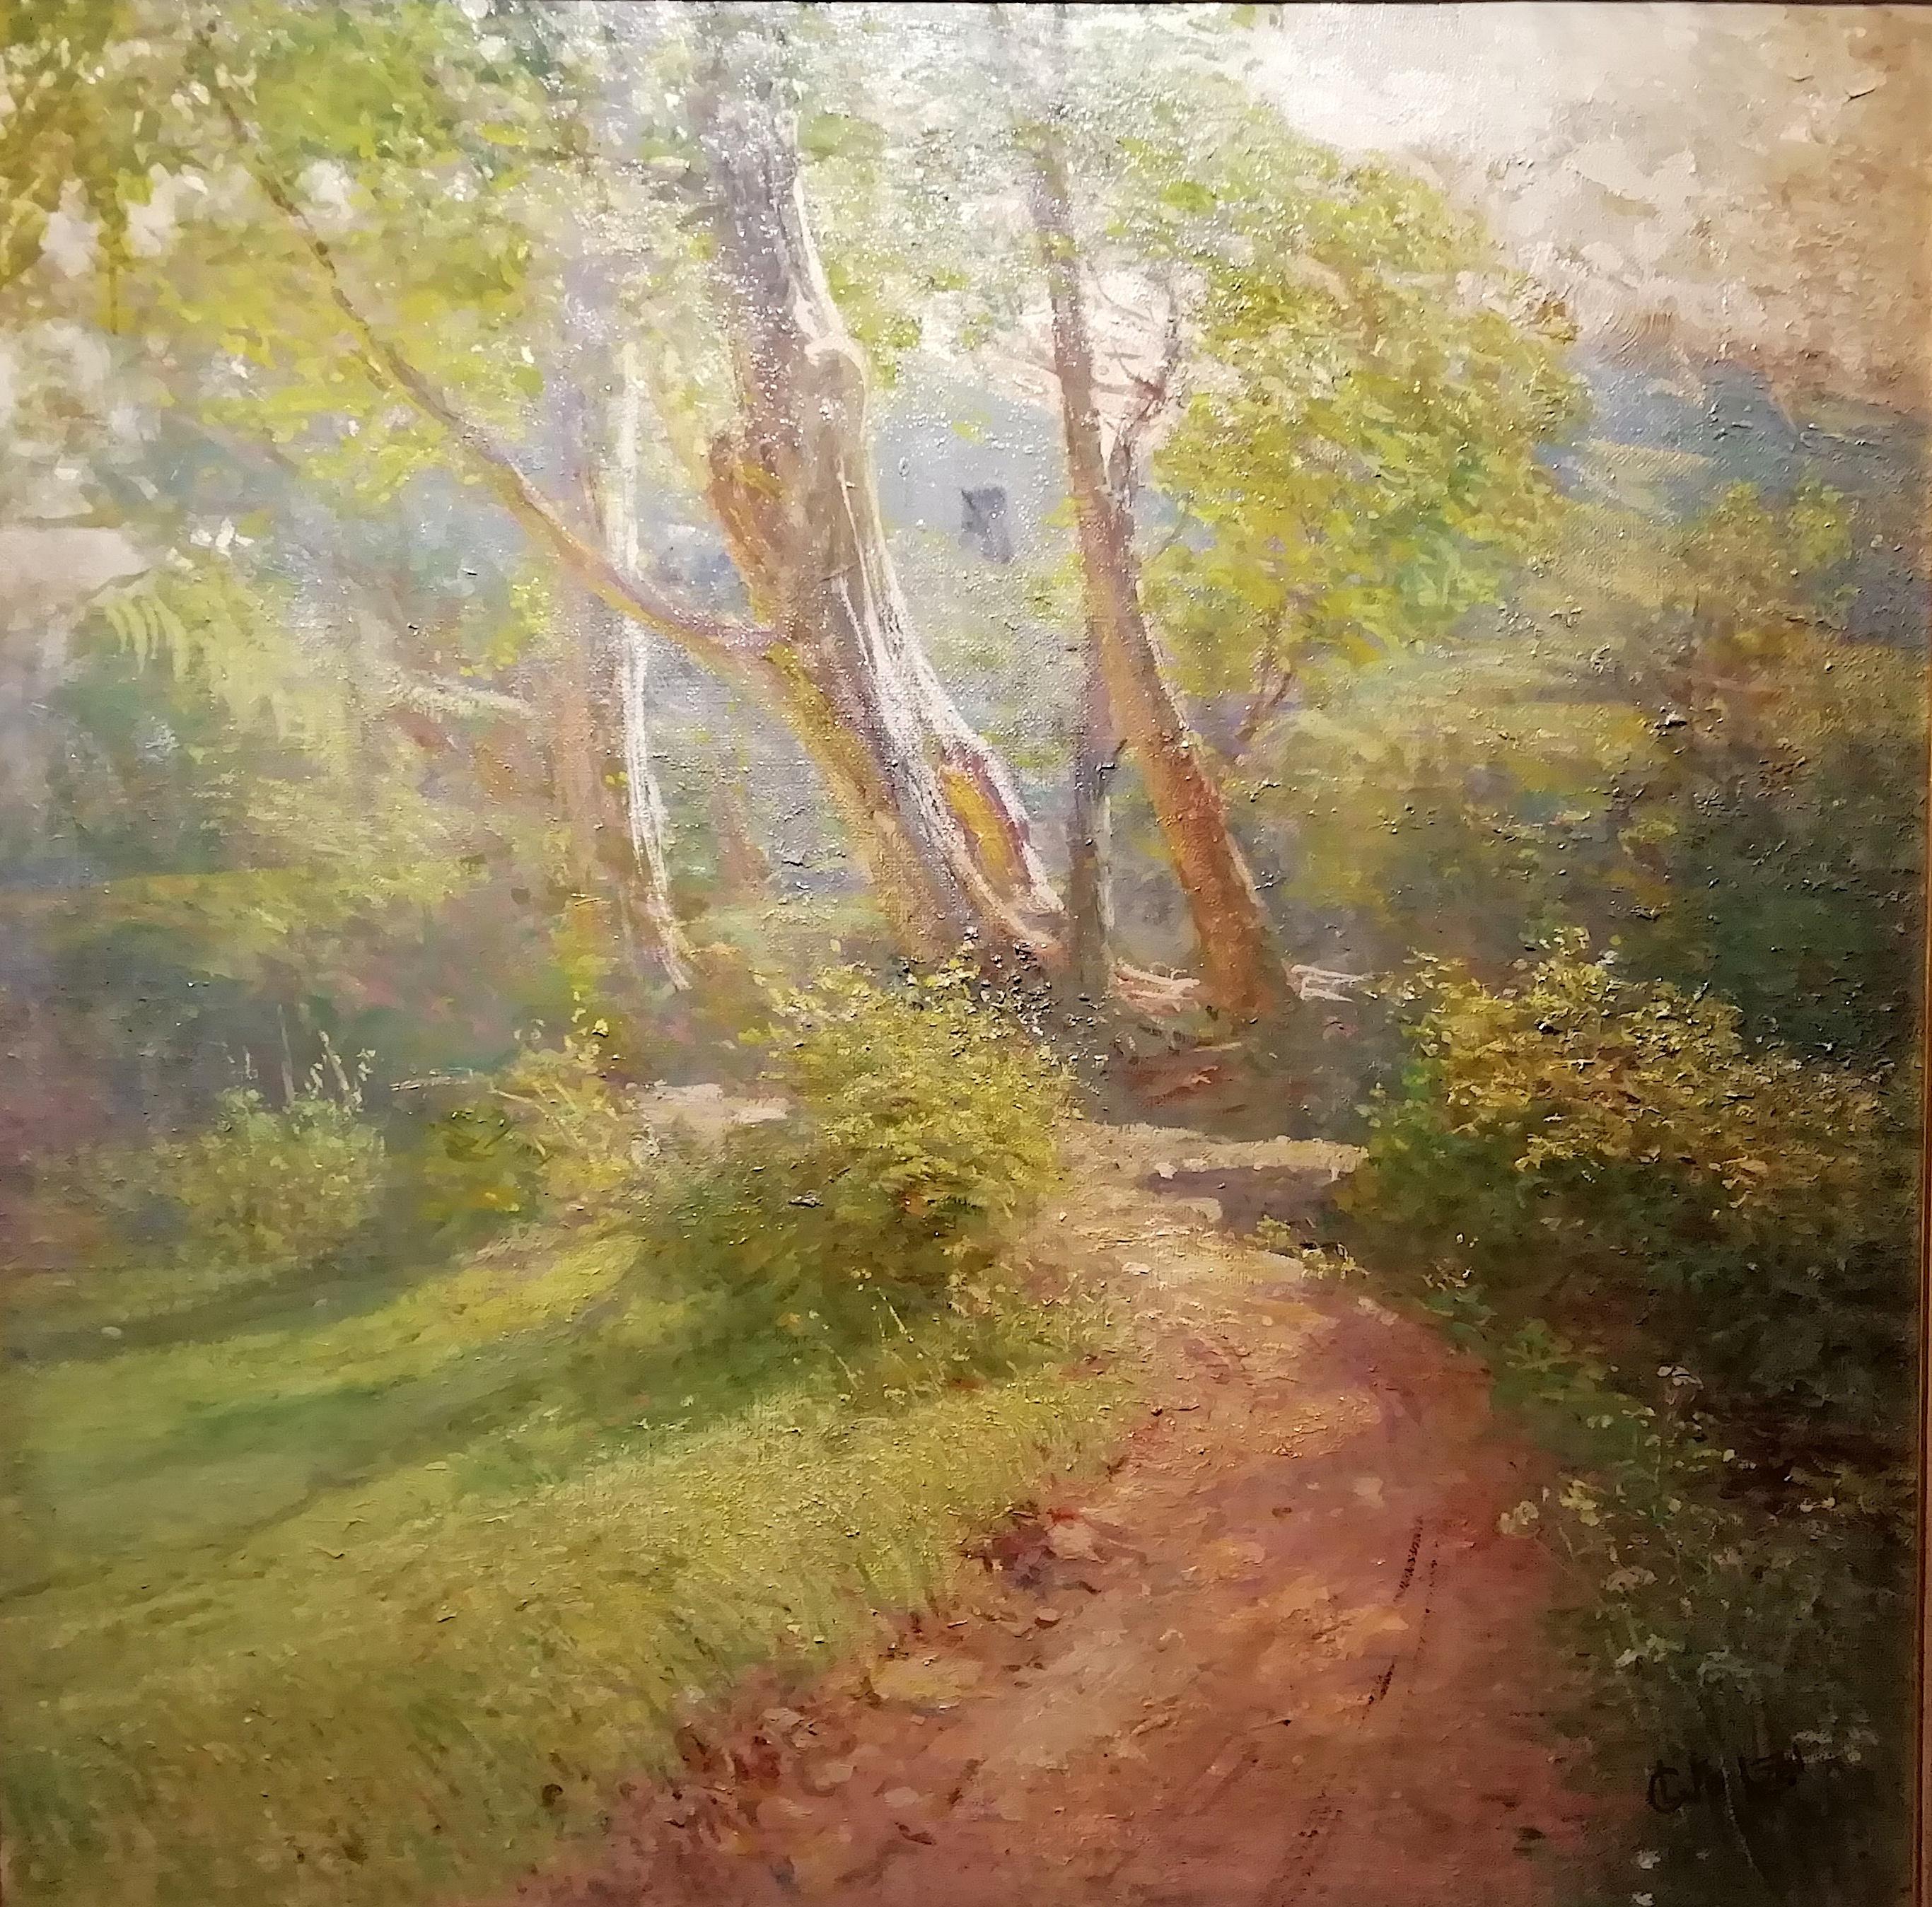 Cleto Luzzi (1884-1952)
Country road
Oil on wood
Provenance: Heirs of the Painter
Signed lower right: Cleto Luzzi

A Roman painter at the court of the King of Siam:
Cleto Luzzi belongs to the still-substantial category of artists who lived